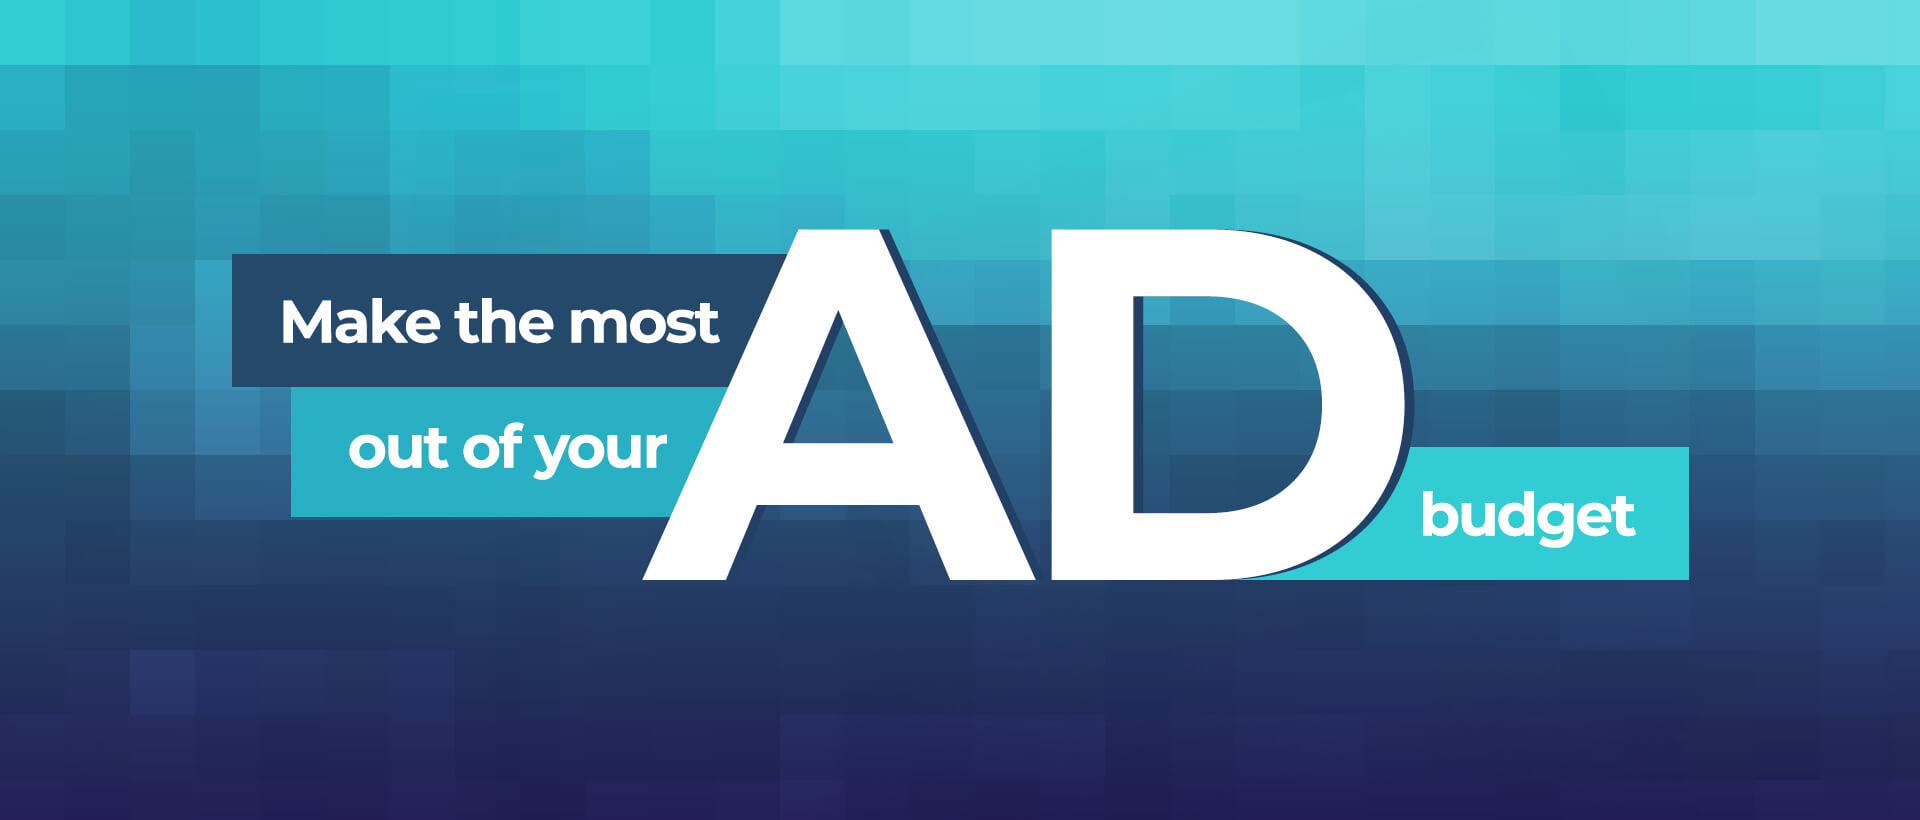 Make the most out of your ad budget